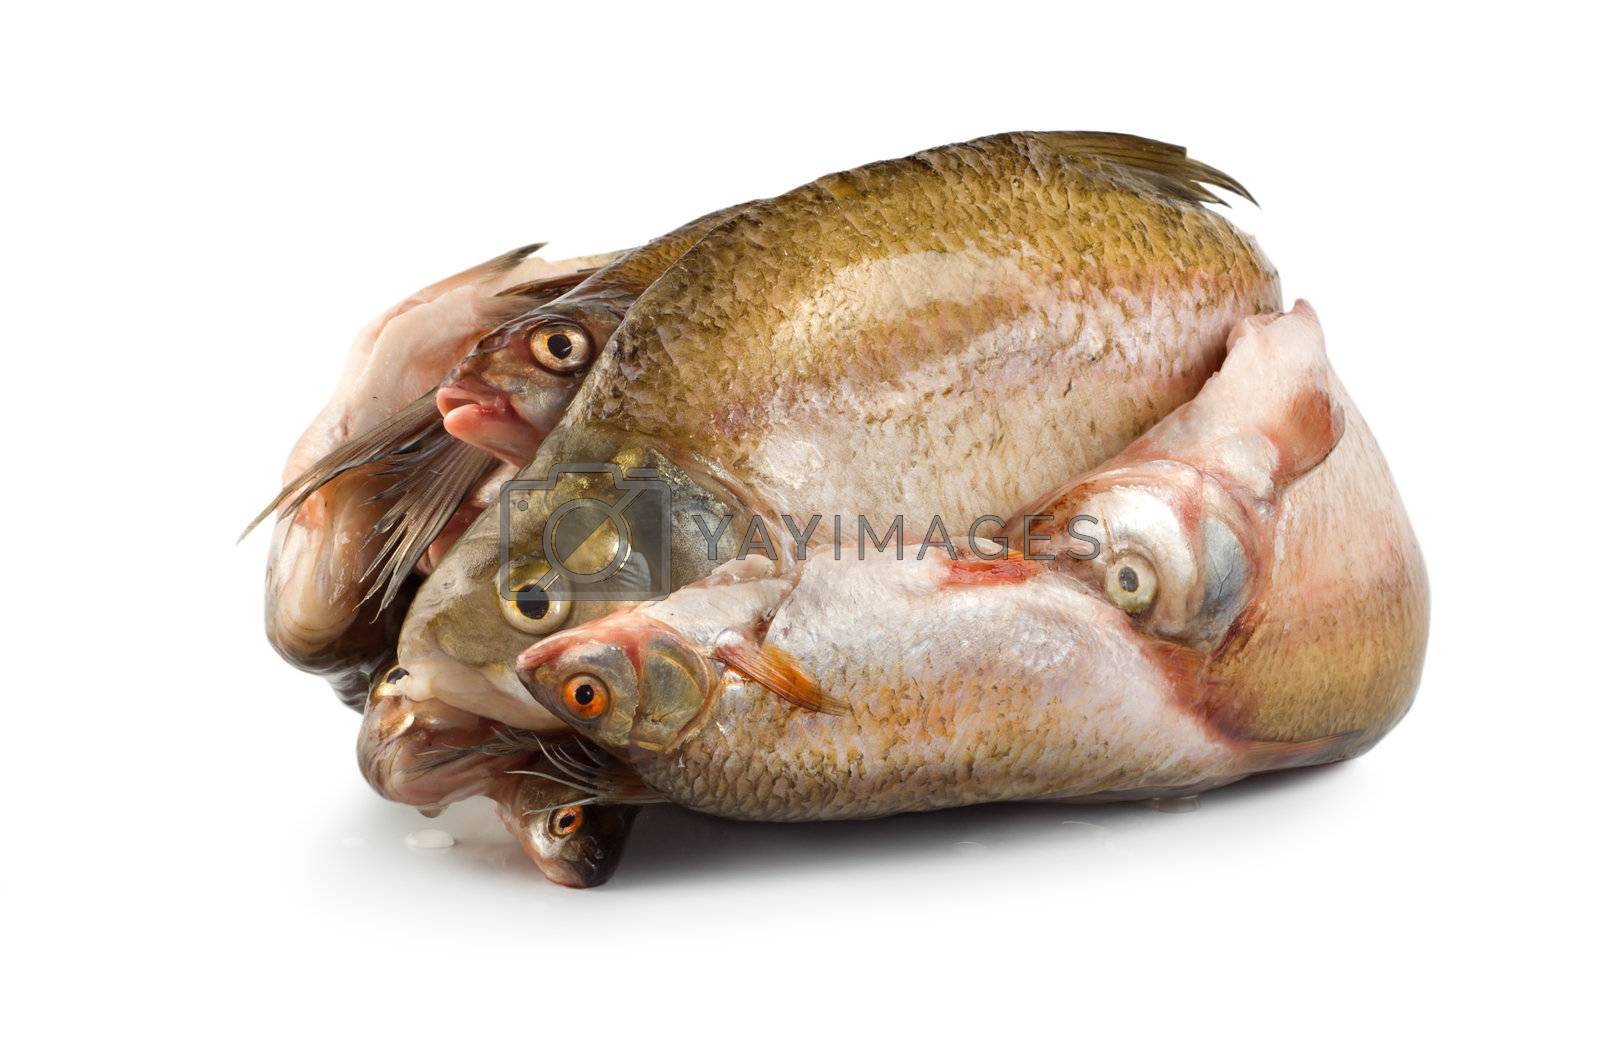 Royalty free image of Frozen fish by Givaga